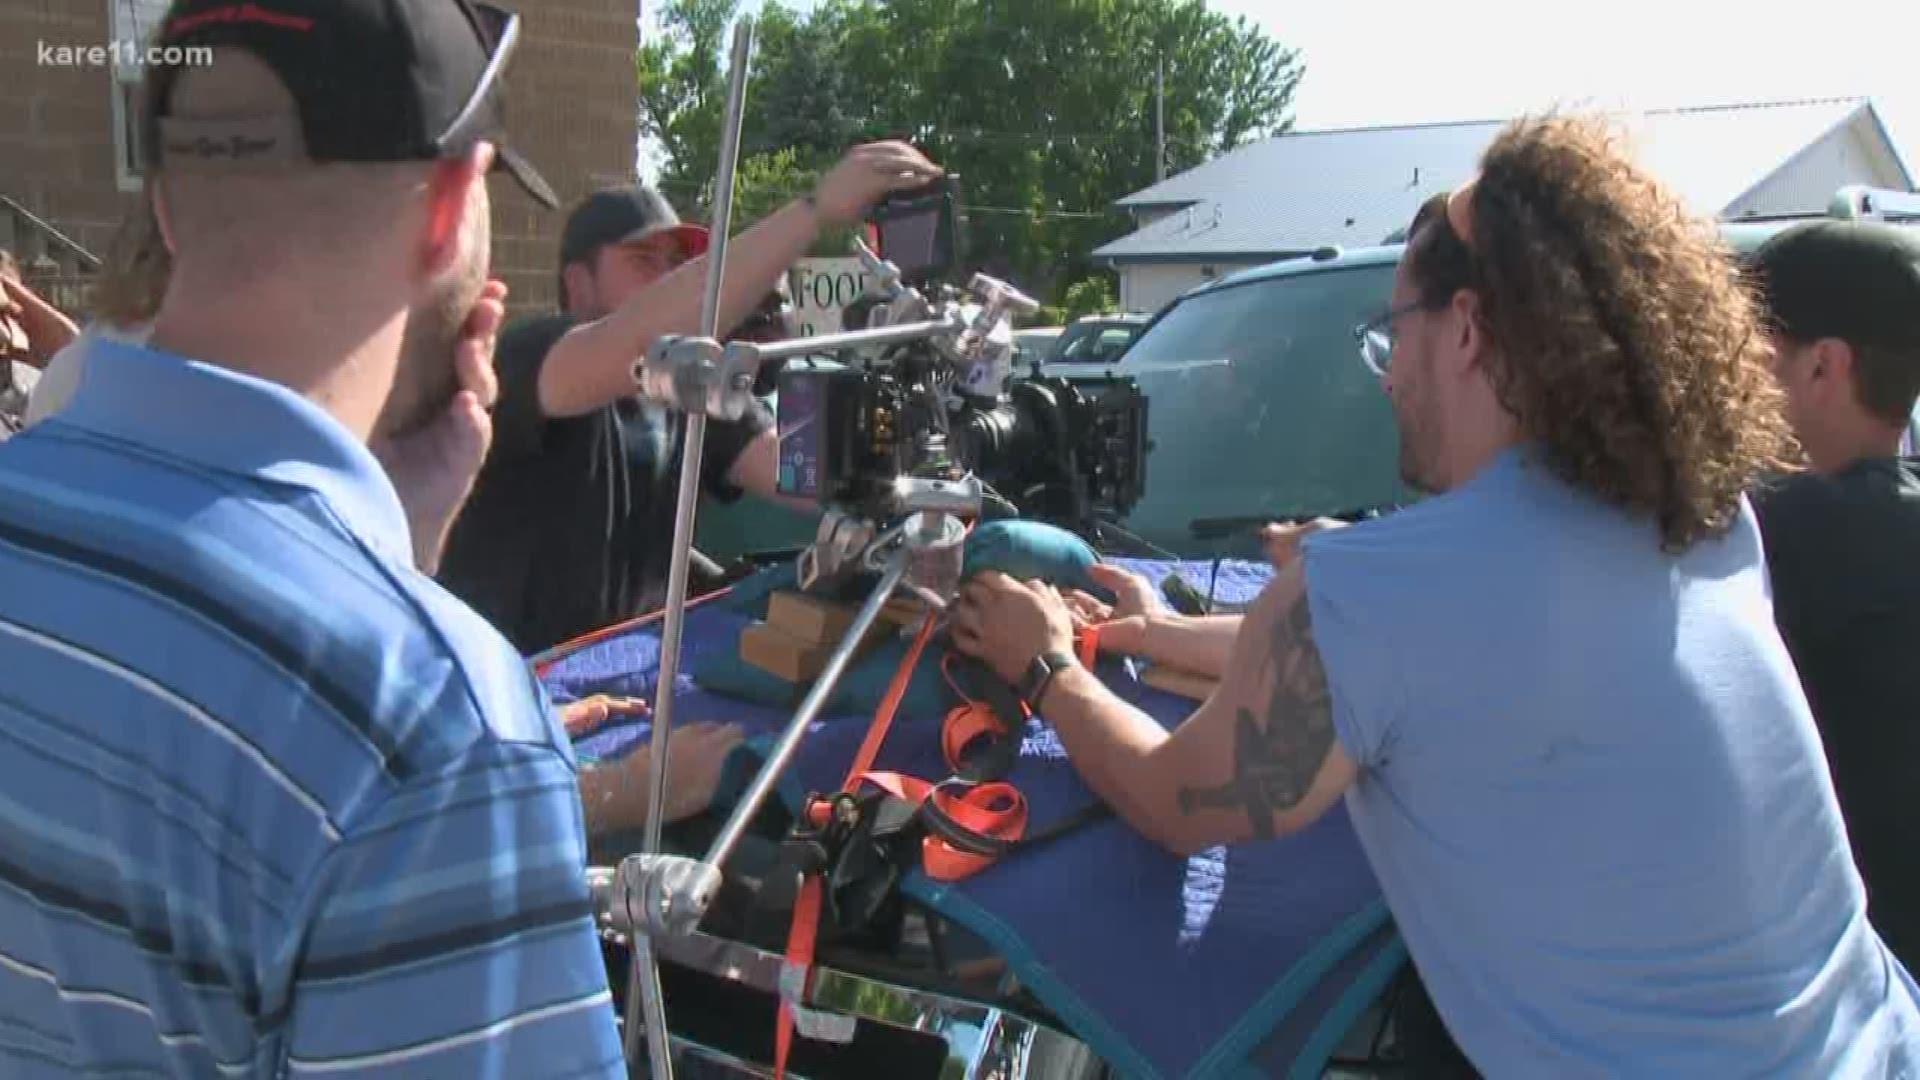 It's lights up on Owatonna. The southern Minnesota city is getting a taste of Hollywood with a new film being shot there. KARE 11's Kent Erdahl got a sneak peek at the action.